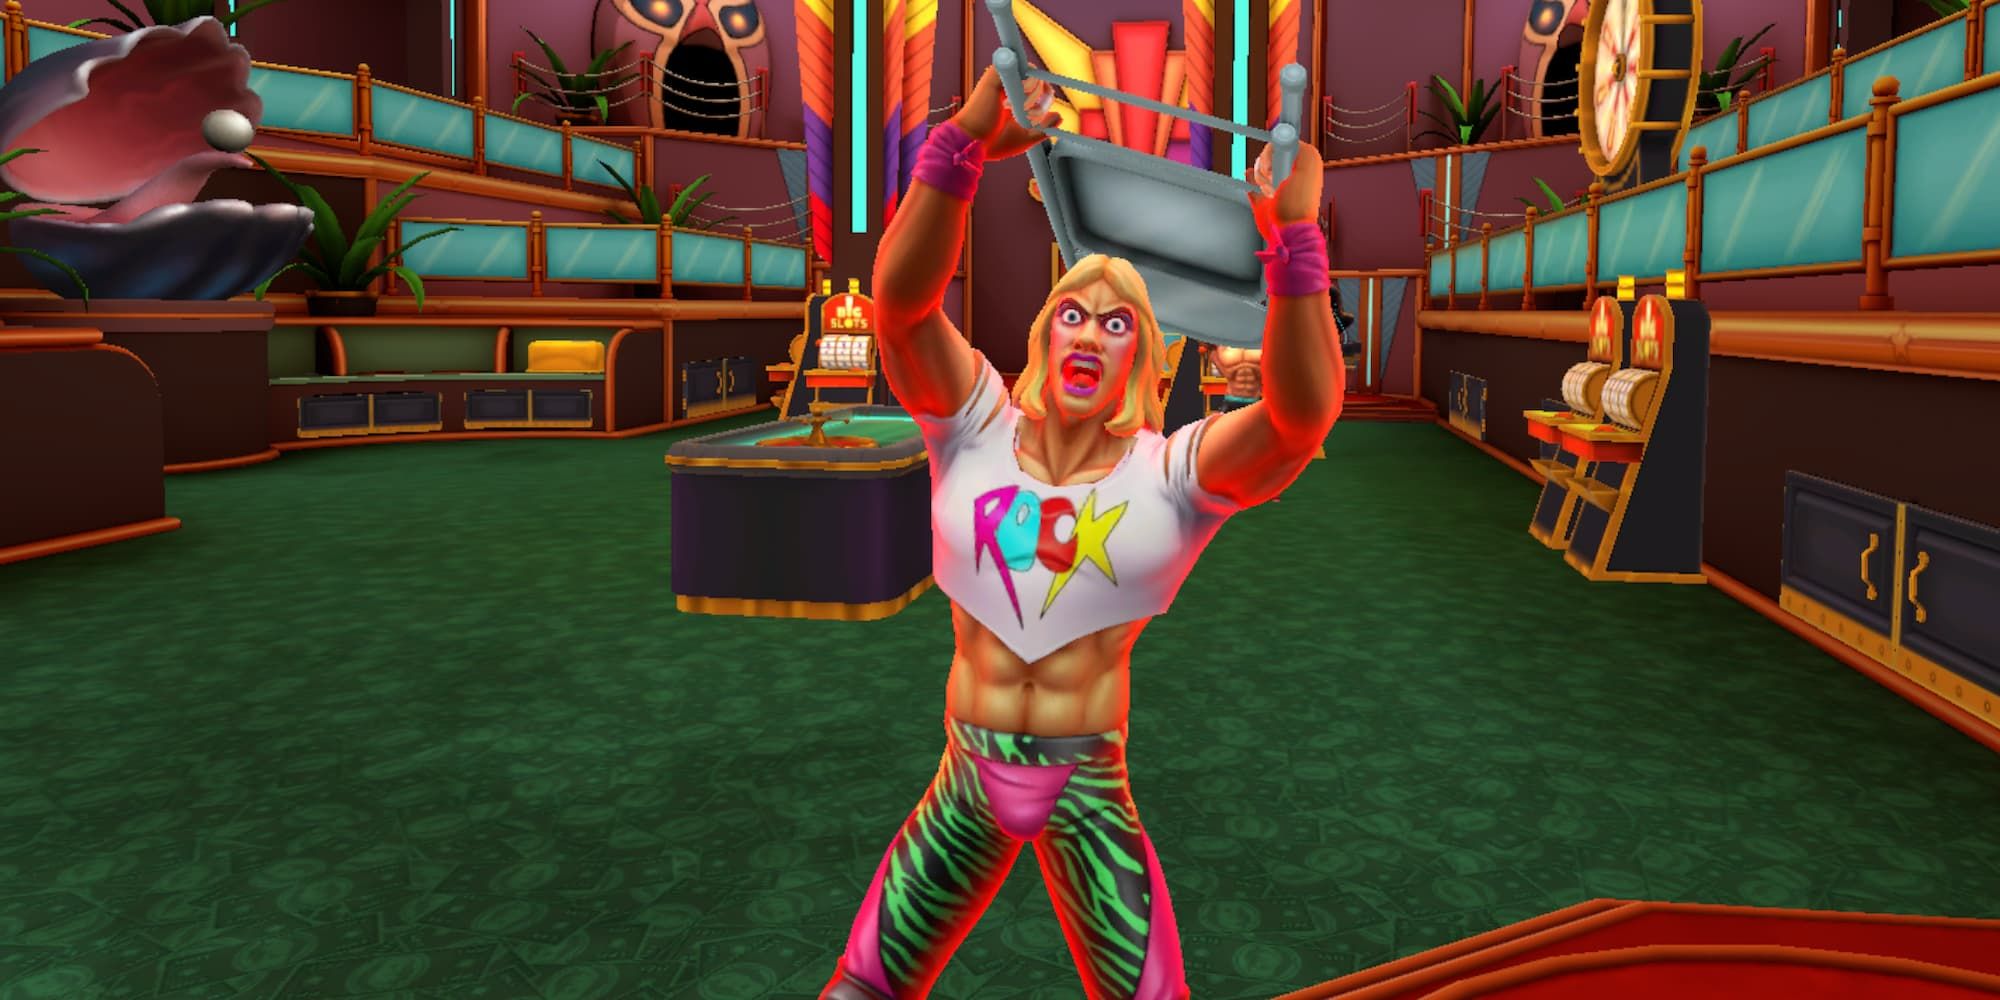 A long-haired rocker in Path Of The Warrior attacks with a steel chair.